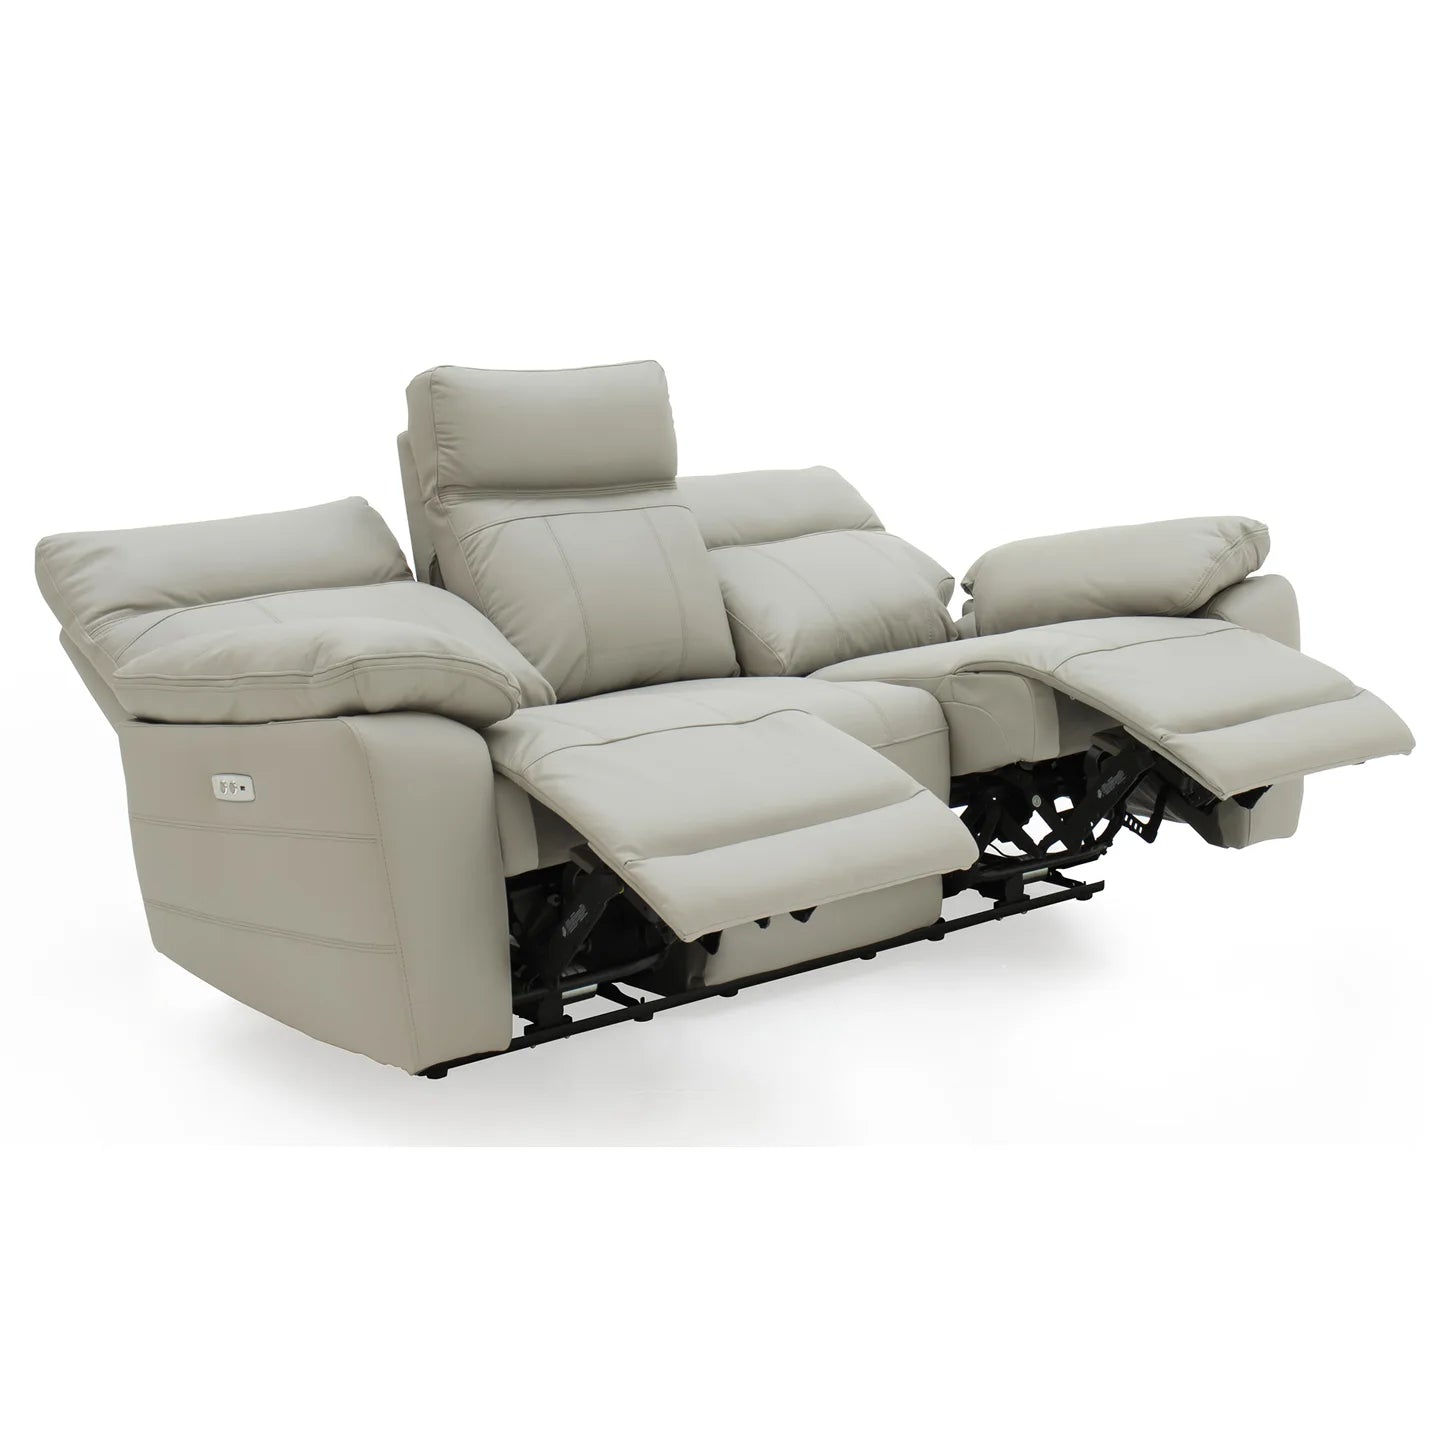 Positano Light Grey Leather 3 Seater Electric Recliner Sofa